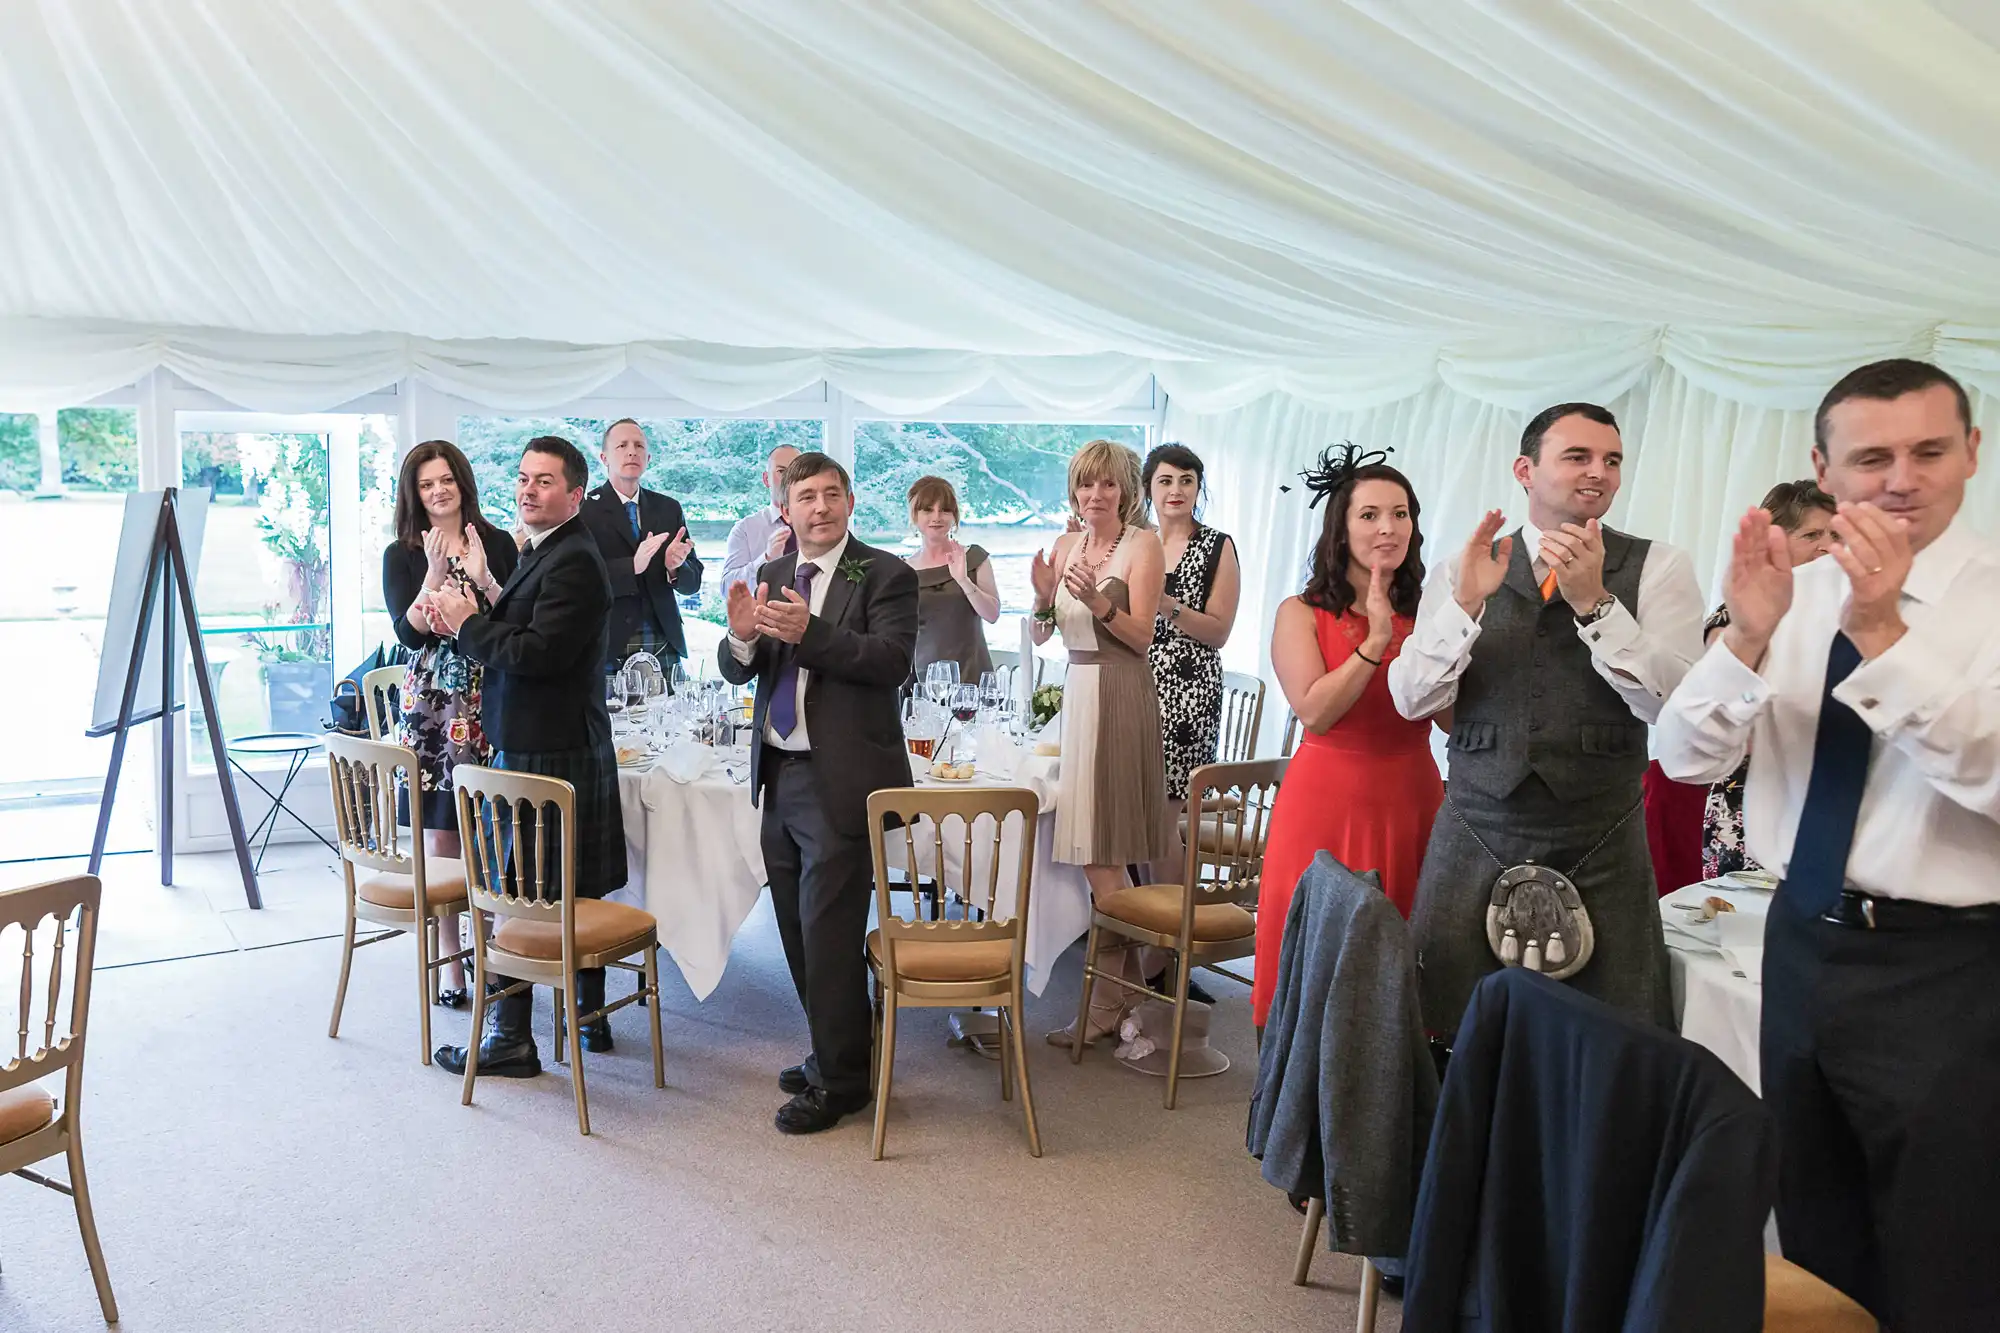 Guests standing and applauding at a wedding reception inside a tent.